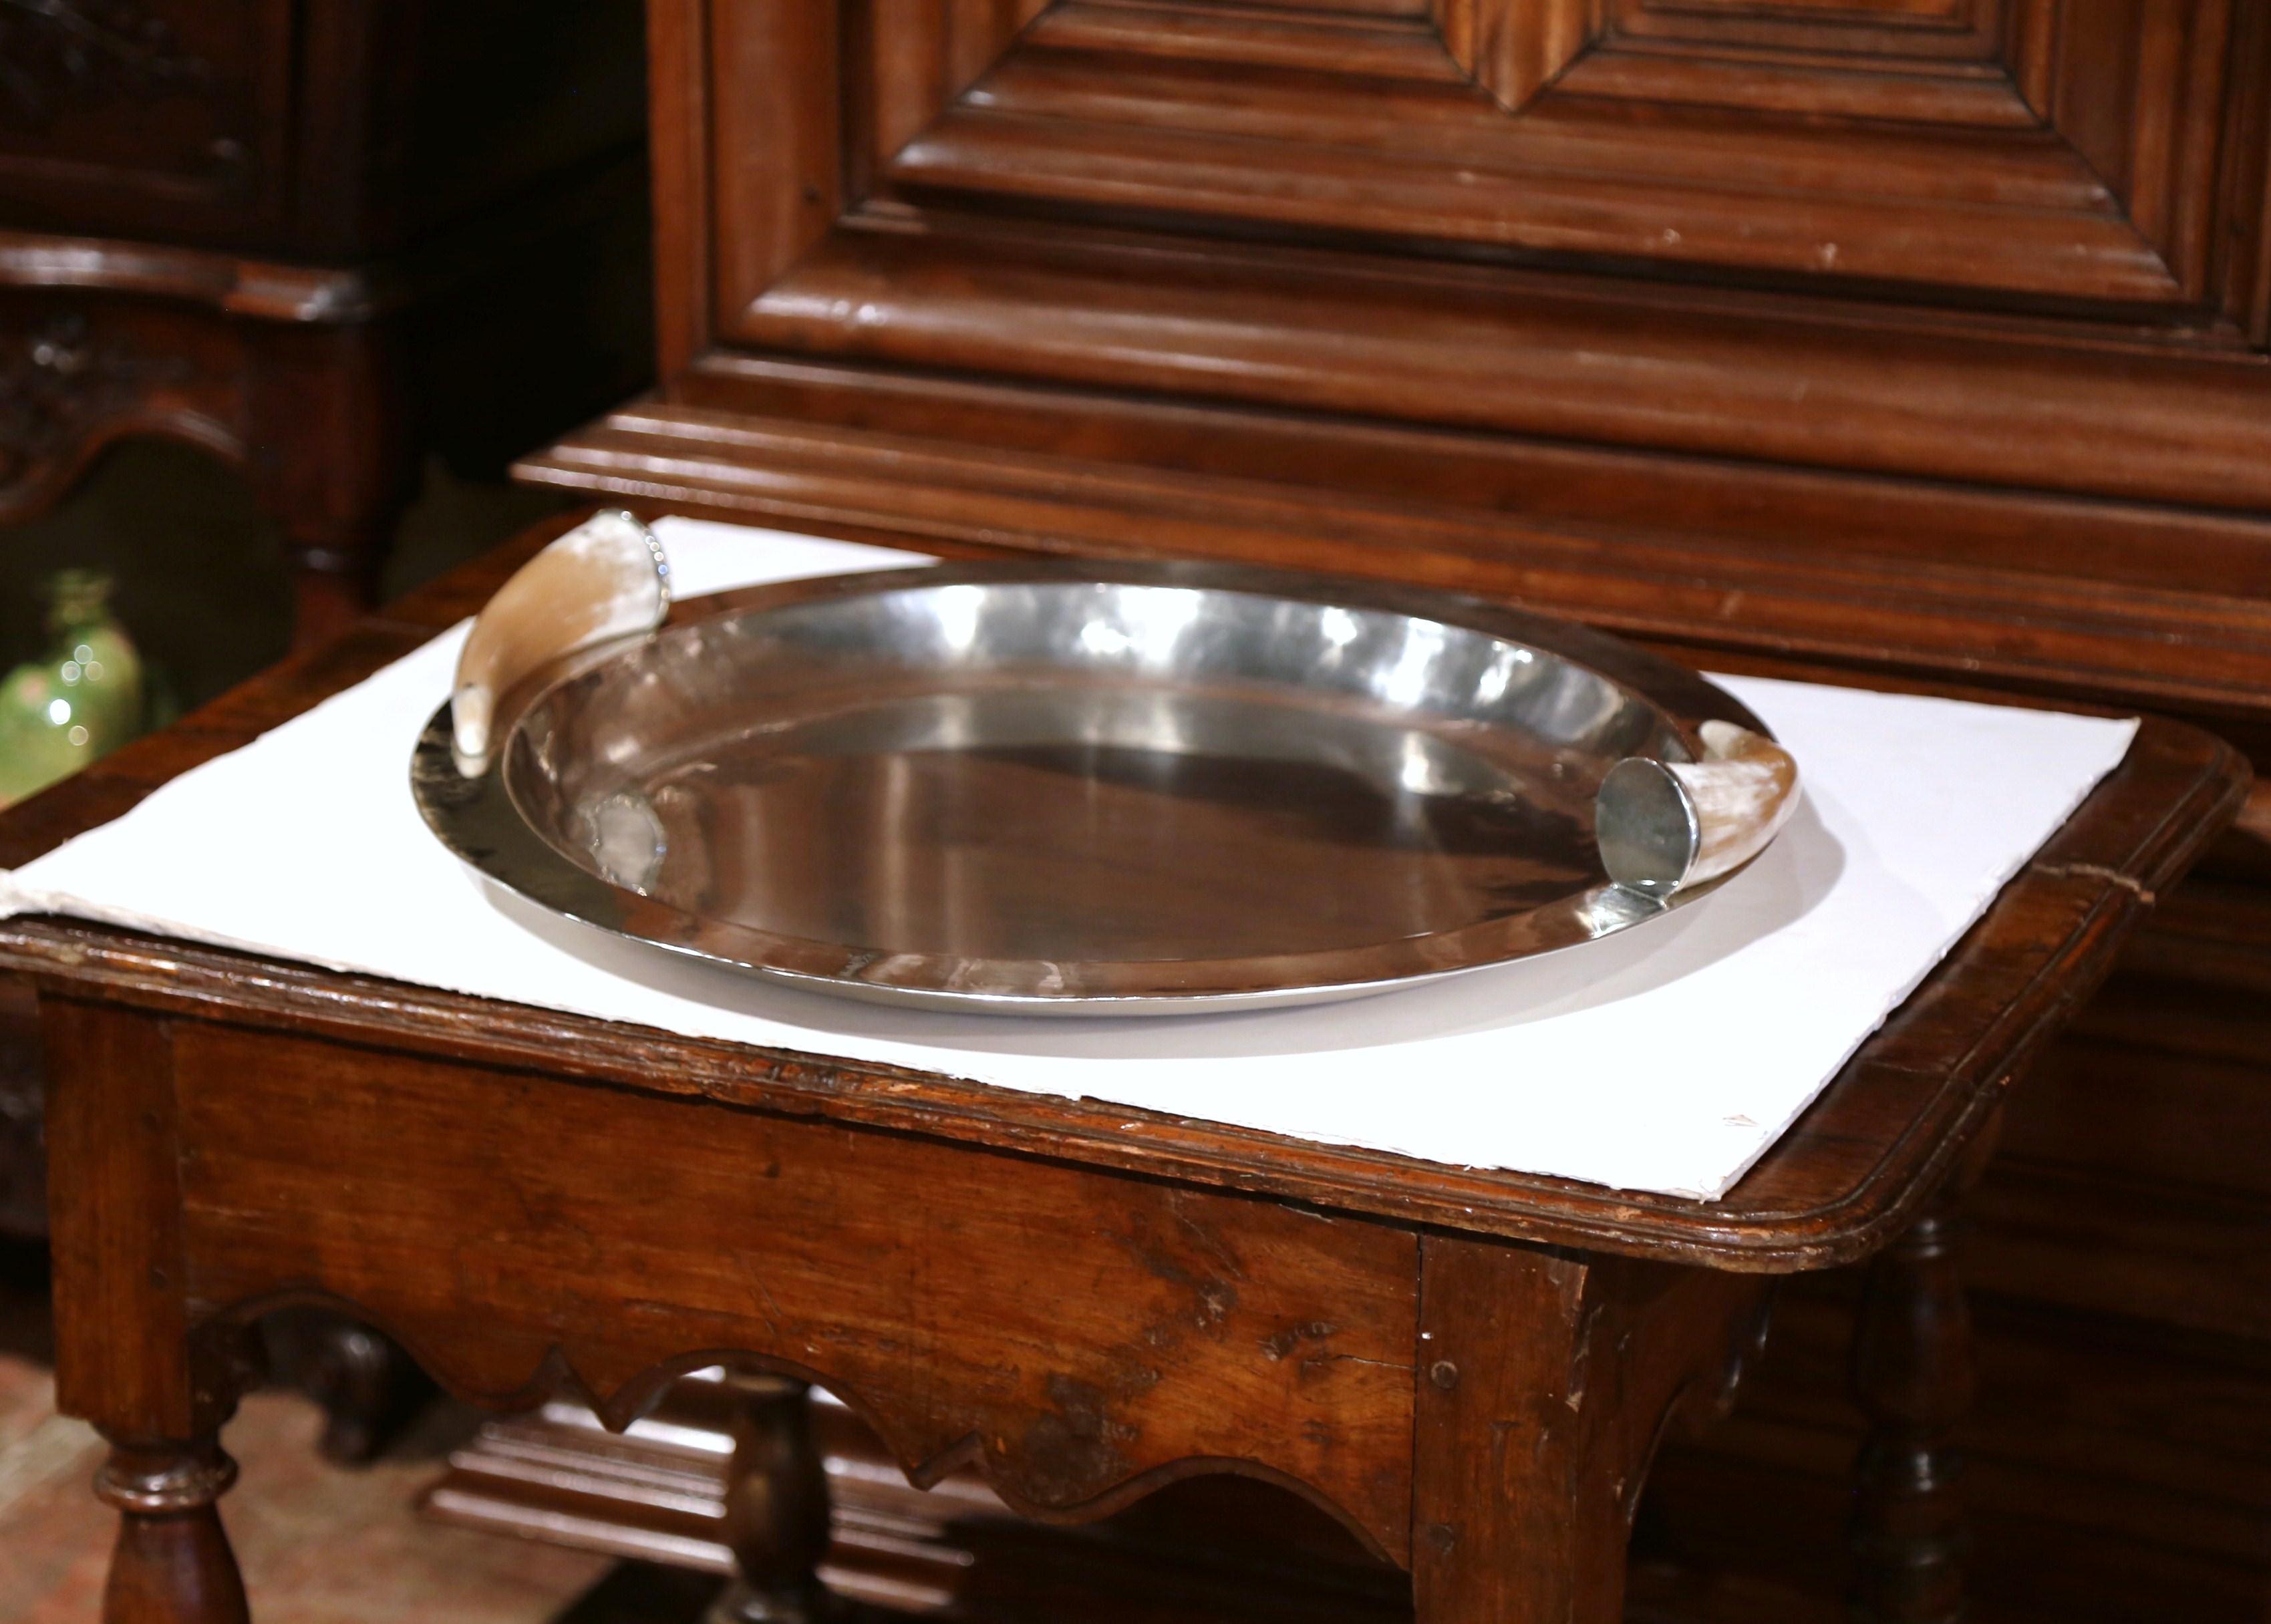 This large serving dish was created in Argentina, circa 1980. Round in shape, the traditional silver plated bowl features a pair of cow horn handles on either side for countryside flair. This unique, rustic platter is in excellent condition with a